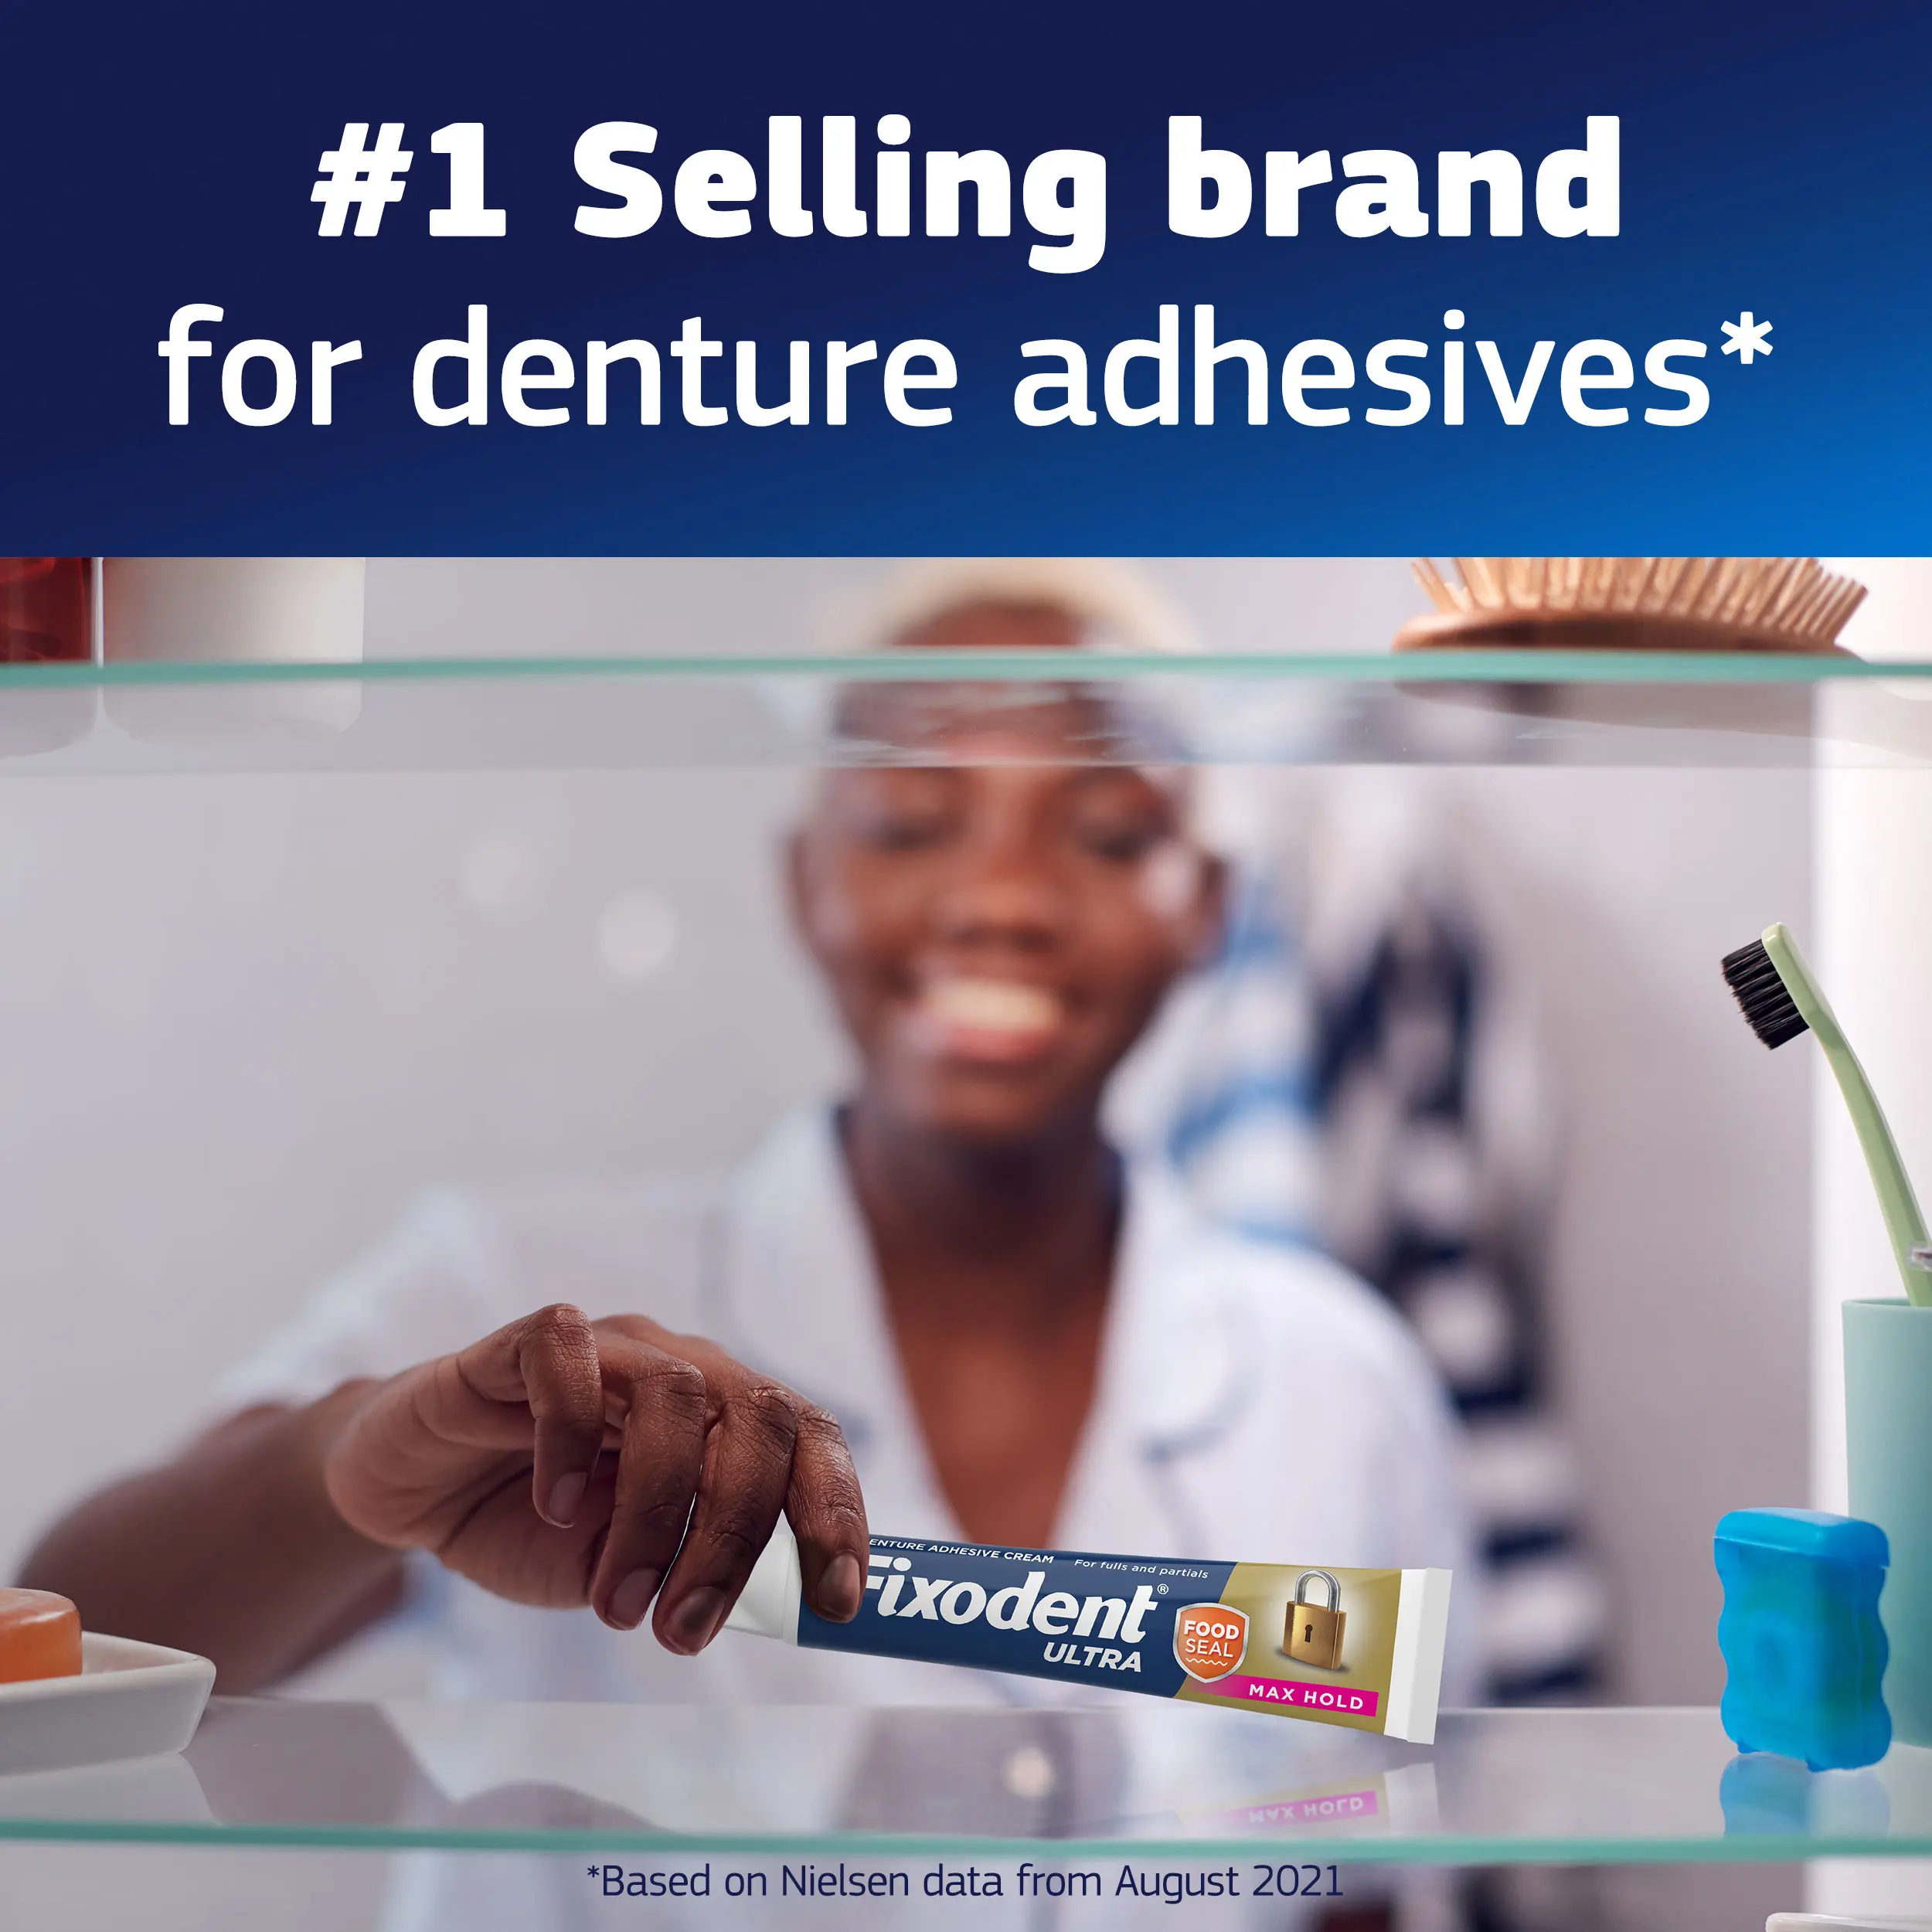  Fixodent Ultra Dual Power - #1 Selling brand for denture adhesives